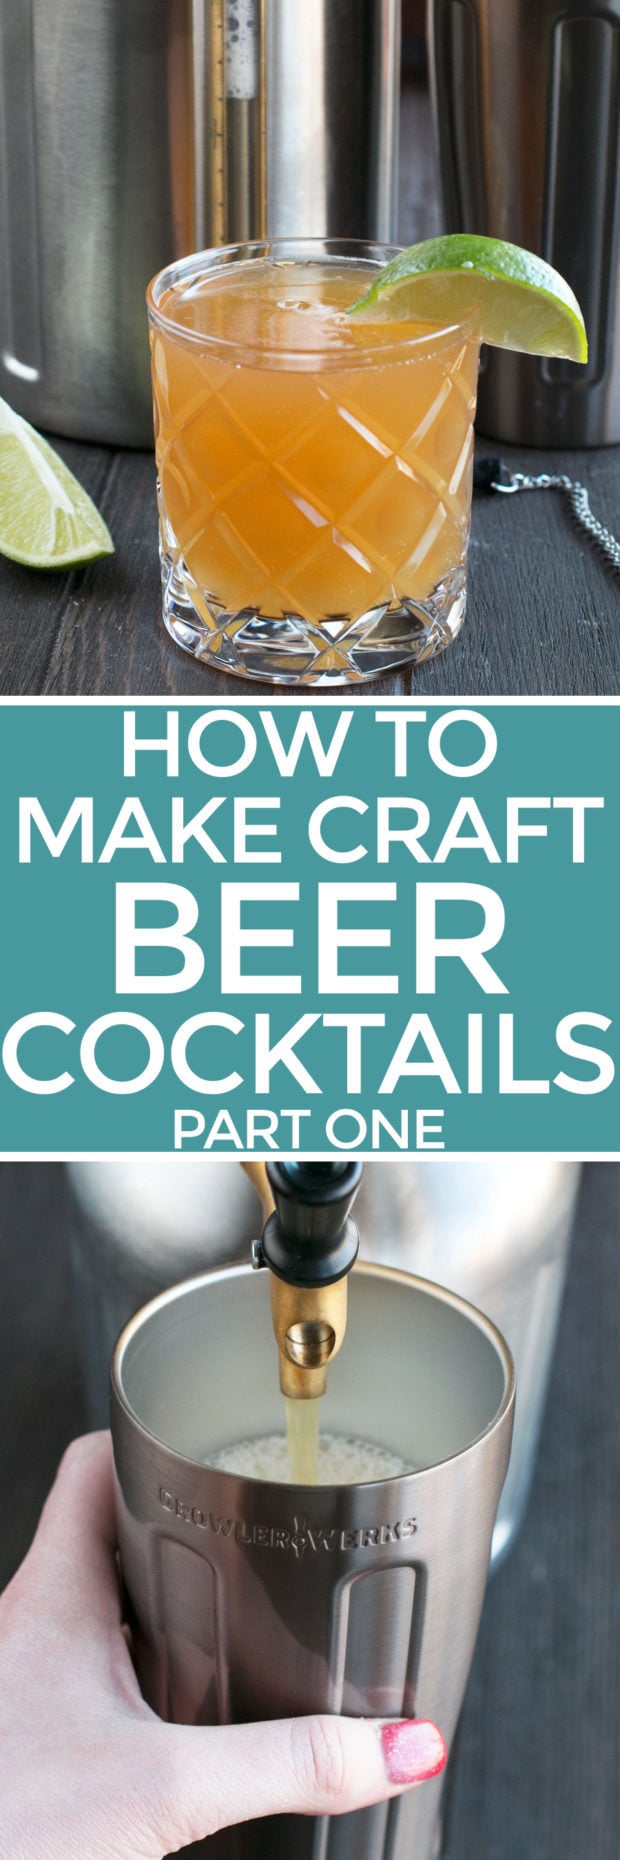 How To Make Craft Beer Cocktails, Part One | cakenknife.com #beer #craftbeer #ad #beercocktail #cocktail #howto #diy